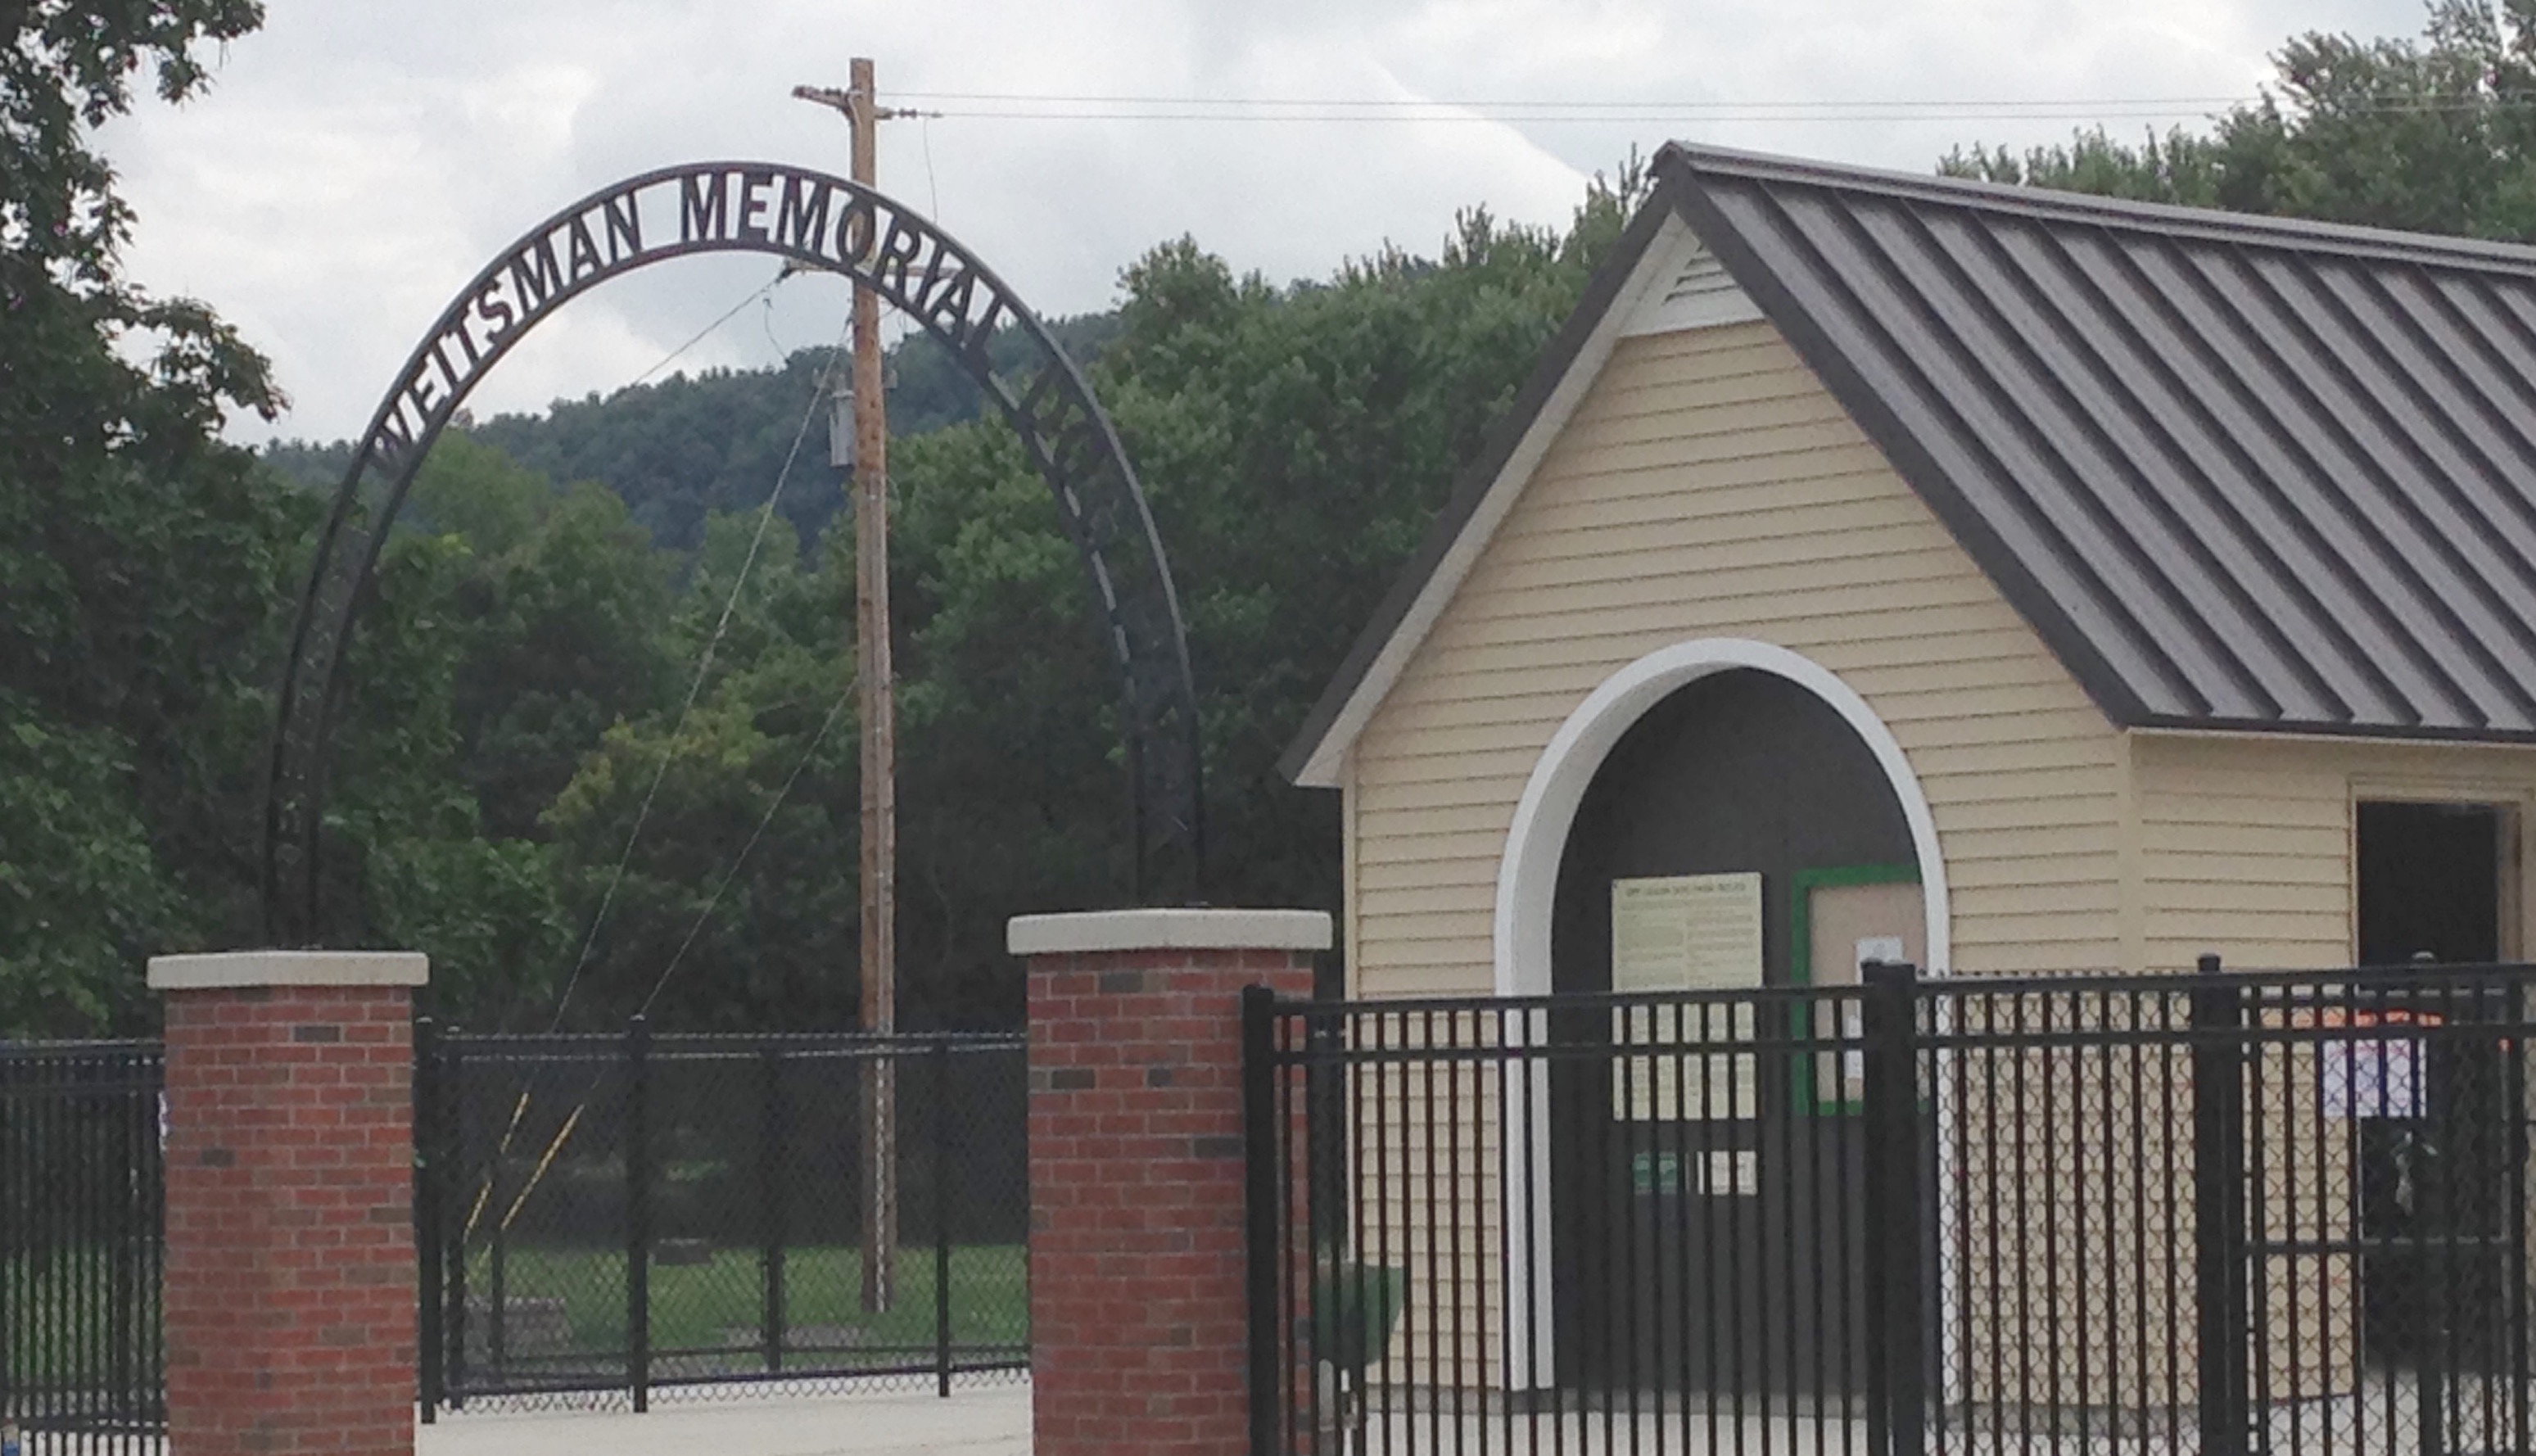 Official opening of Rebecca Weitsman Memorial Dog Park to take place September 4 